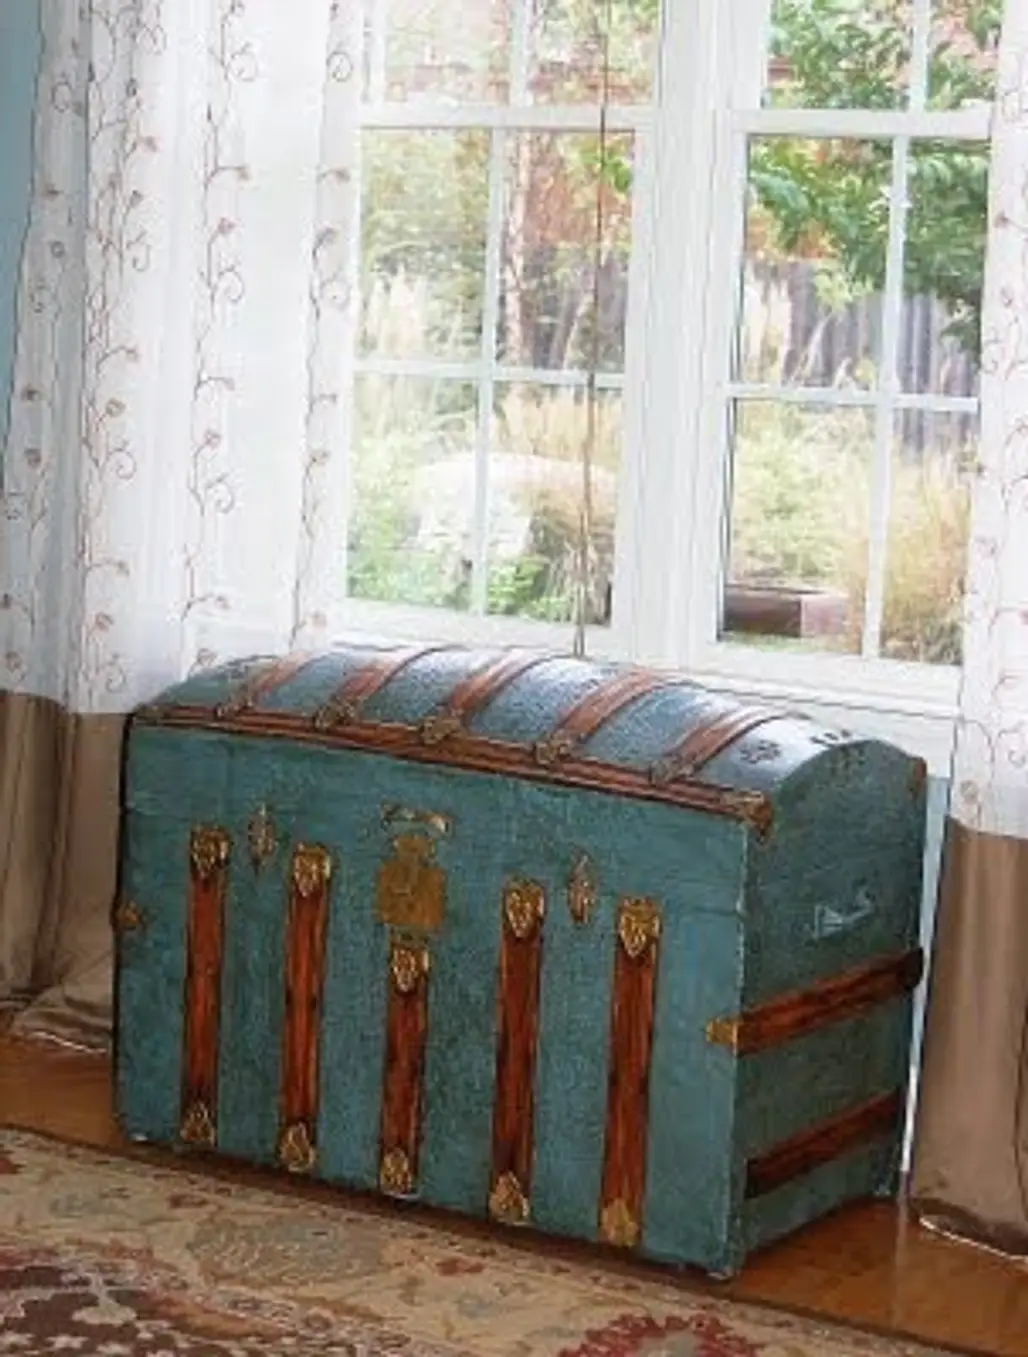 Use a Wonderful Old Trunk to Liven up a Window